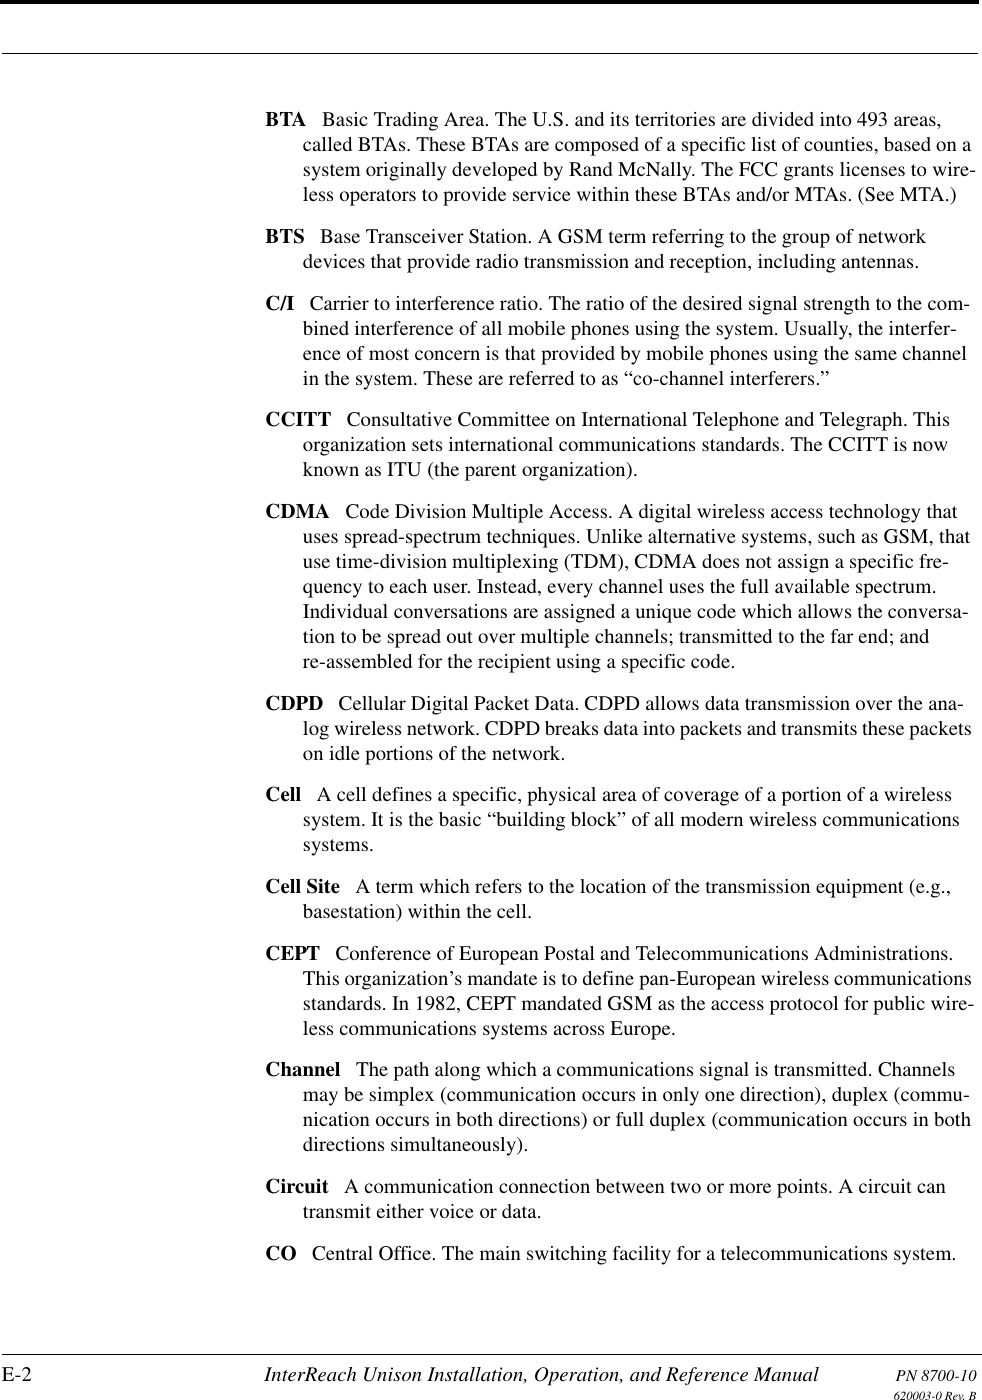 E-2 InterReach Unison Installation, Operation, and Reference Manual PN 8700-10620003-0 Rev. BBTA Basic Trading Area. The U.S. and its territories are divided into 493 areas, called BTAs. These BTAs are composed of a specific list of counties, based on a system originally developed by Rand McNally. The FCC grants licenses to wire-less operators to provide service within these BTAs and/or MTAs. (See MTA.) BTS Base Transceiver Station. A GSM term referring to the group of network devices that provide radio transmission and reception, including antennas. C/I Carrier to interference ratio. The ratio of the desired signal strength to the com-bined interference of all mobile phones using the system. Usually, the interfer-ence of most concern is that provided by mobile phones using the same channel in the system. These are referred to as “co-channel interferers.” CCITT Consultative Committee on International Telephone and Telegraph. This organization sets international communications standards. The CCITT is now known as ITU (the parent organization). CDMA Code Division Multiple Access. A digital wireless access technology that uses spread-spectrum techniques. Unlike alternative systems, such as GSM, that use time-division multiplexing (TDM), CDMA does not assign a specific fre-quency to each user. Instead, every channel uses the full available spectrum. Individual conversations are assigned a unique code which allows the conversa-tion to be spread out over multiple channels; transmitted to the far end; and re-assembled for the recipient using a specific code. CDPD Cellular Digital Packet Data. CDPD allows data transmission over the ana-log wireless network. CDPD breaks data into packets and transmits these packets on idle portions of the network. Cell A cell defines a specific, physical area of coverage of a portion of a wireless system. It is the basic “building block” of all modern wireless communications systems. Cell Site A term which refers to the location of the transmission equipment (e.g., basestation) within the cell. CEPT Conference of European Postal and Telecommunications Administrations. This organization’s mandate is to define pan-European wireless communications standards. In 1982, CEPT mandated GSM as the access protocol for public wire-less communications systems across Europe. Channel The path along which a communications signal is transmitted. Channels may be simplex (communication occurs in only one direction), duplex (commu-nication occurs in both directions) or full duplex (communication occurs in both directions simultaneously). Circuit A communication connection between two or more points. A circuit can transmit either voice or data. CO Central Office. The main switching facility for a telecommunications system. 